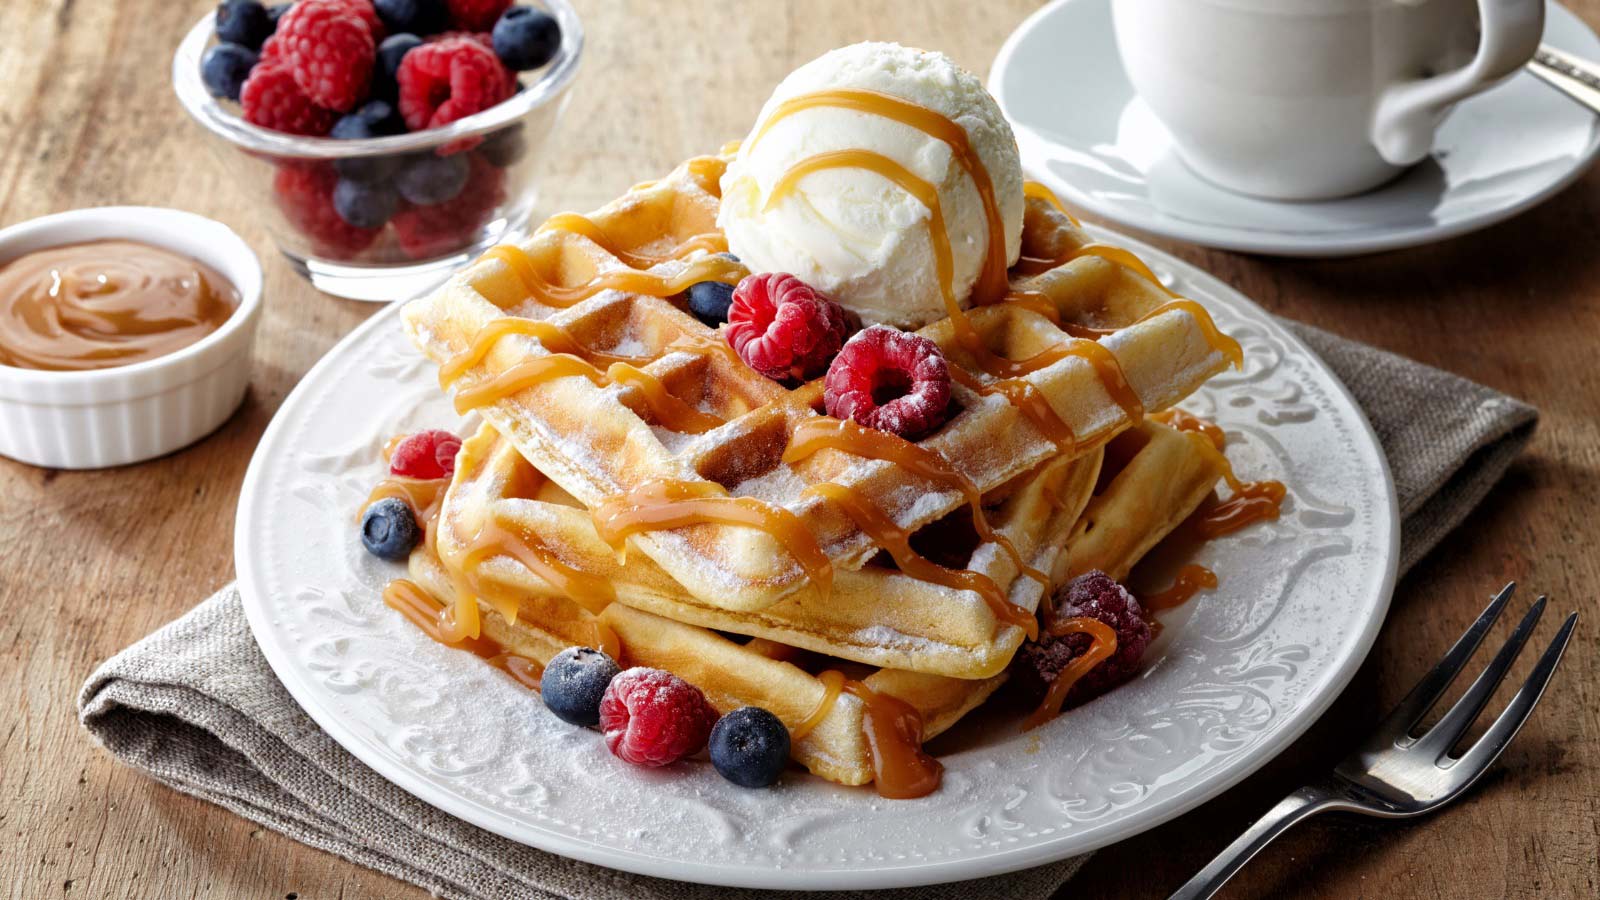 Plate of belgian waffles with ice cream, caramel sauce and fresh berries.